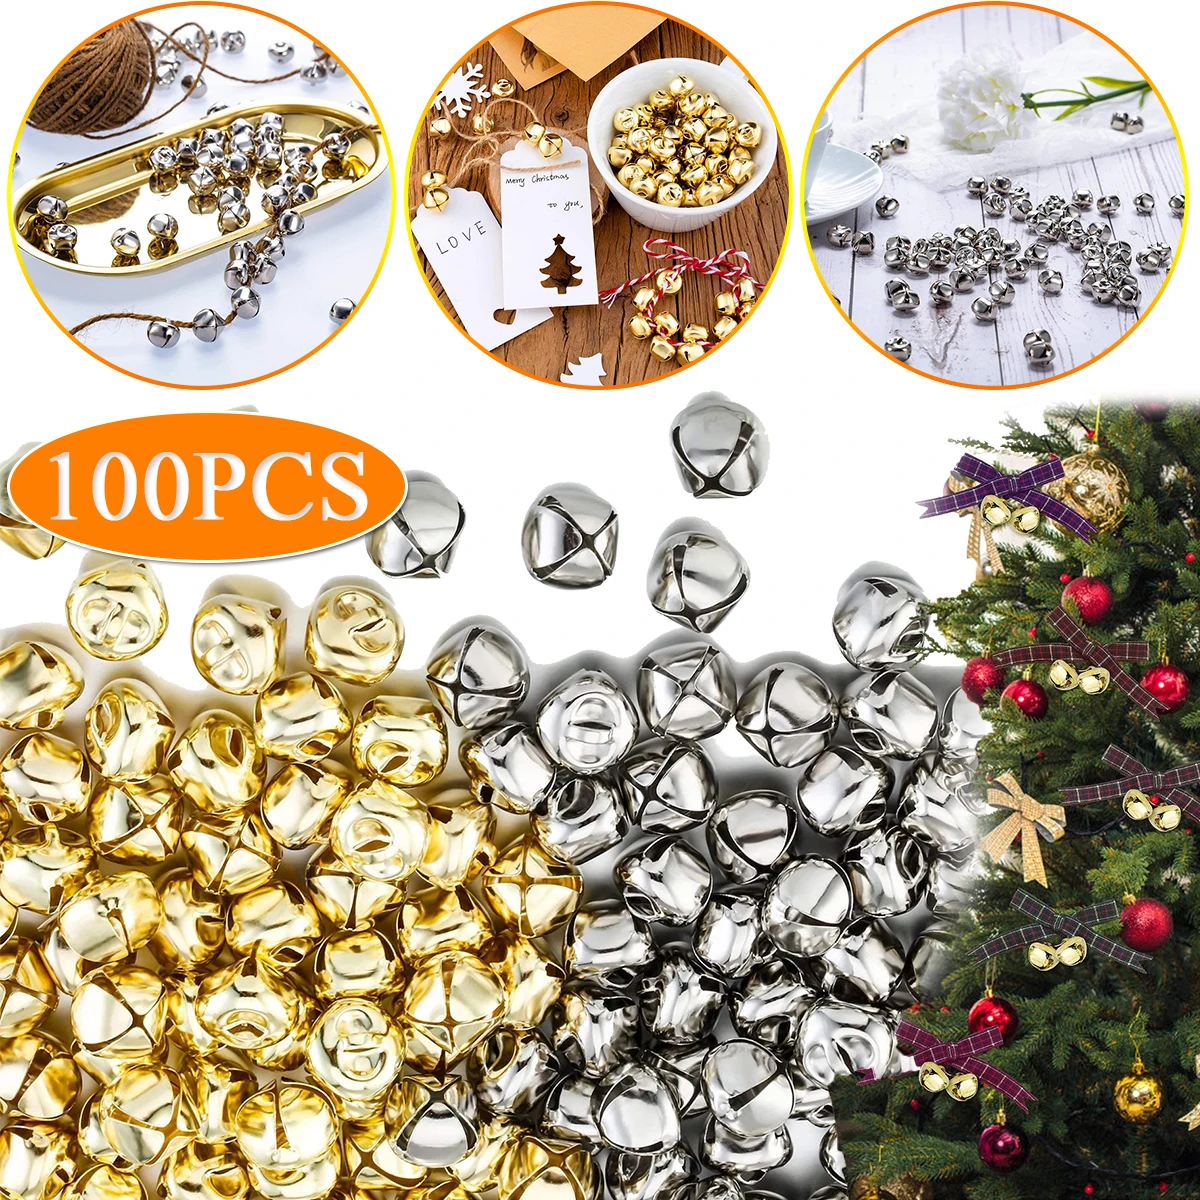 100 Pcs Christmas Gold Silver Jingle Bells DIY Charms Craft Metal Bells for Wreath Home Festival Wedding Xmas Tree Decorations